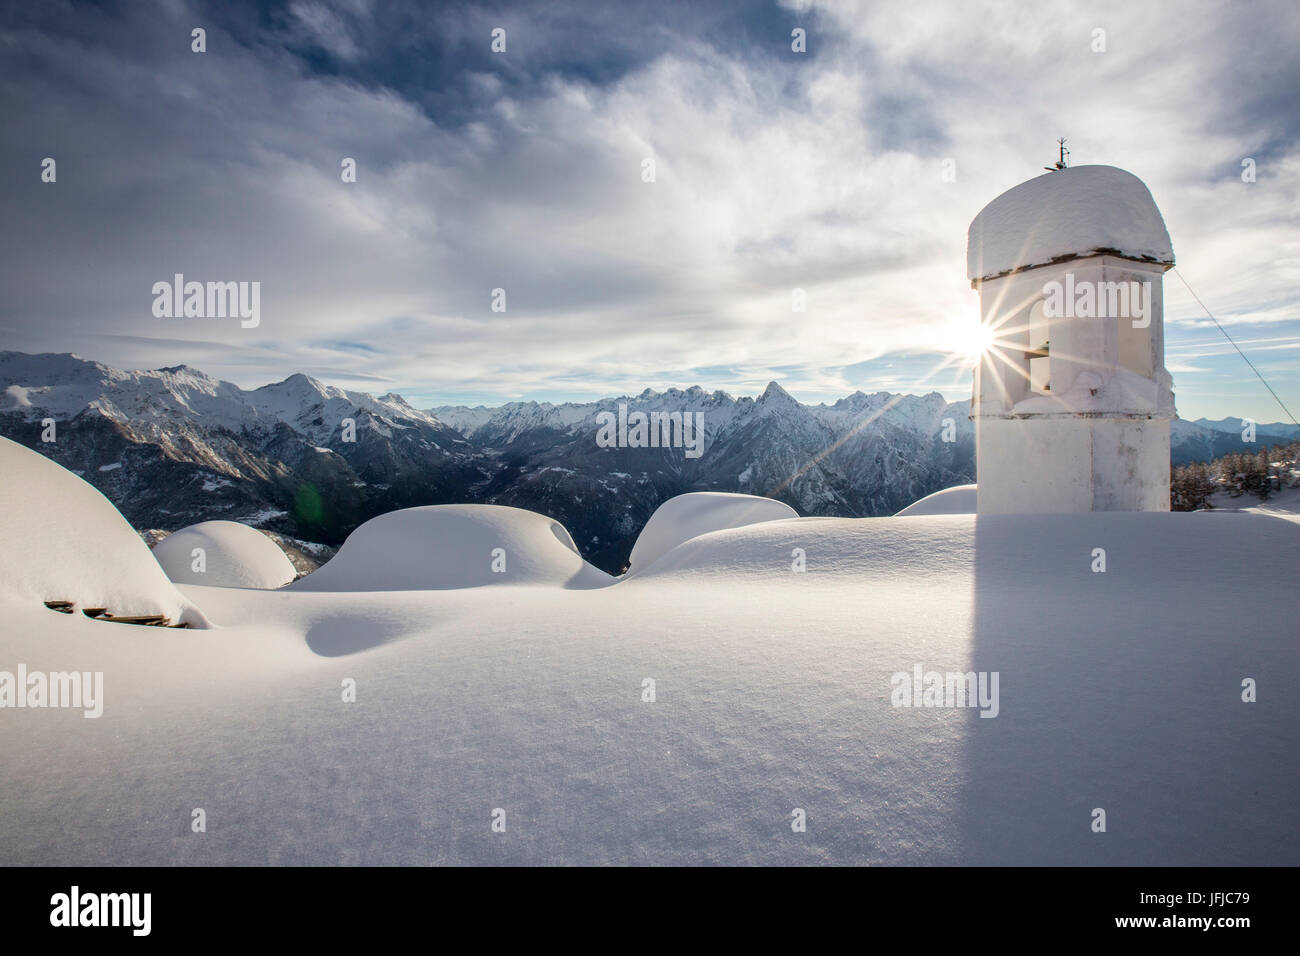 Winter sun shining behind the pictoresque bell tower at Alpe Scima after an heavy snowfall, Valchiavenna, Valtellina Lombardy Italy Europe Stock Photo